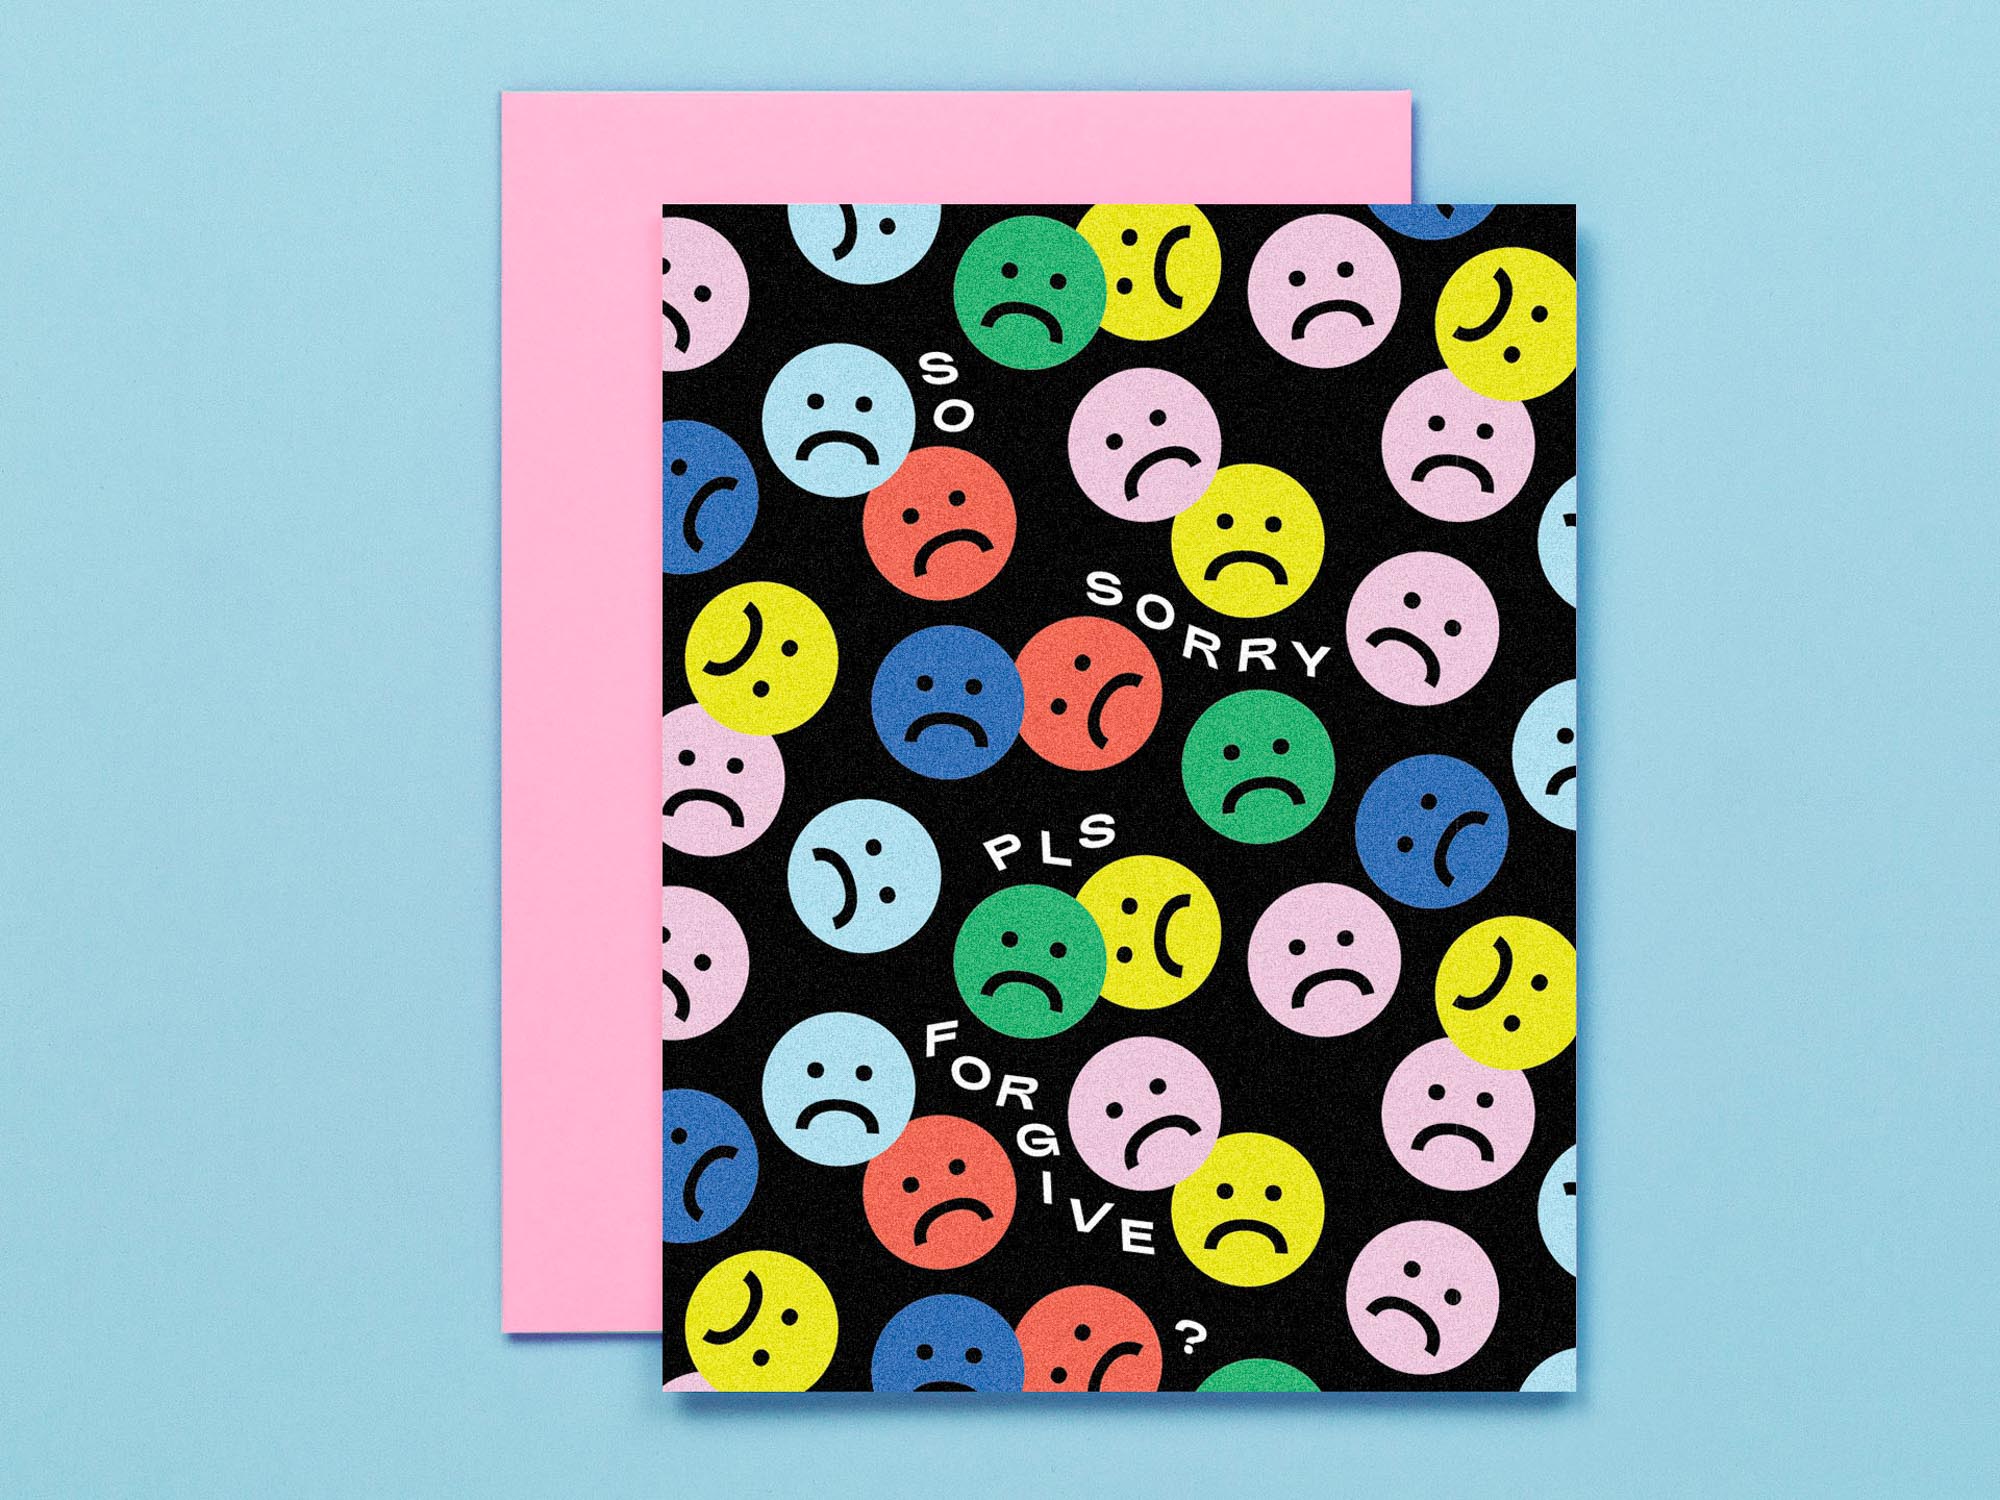 "So Sorry Pls Forgive?" sorry card with sad faces and smiley faces or smiley emojis. Made in USA by @mydarlin_bk